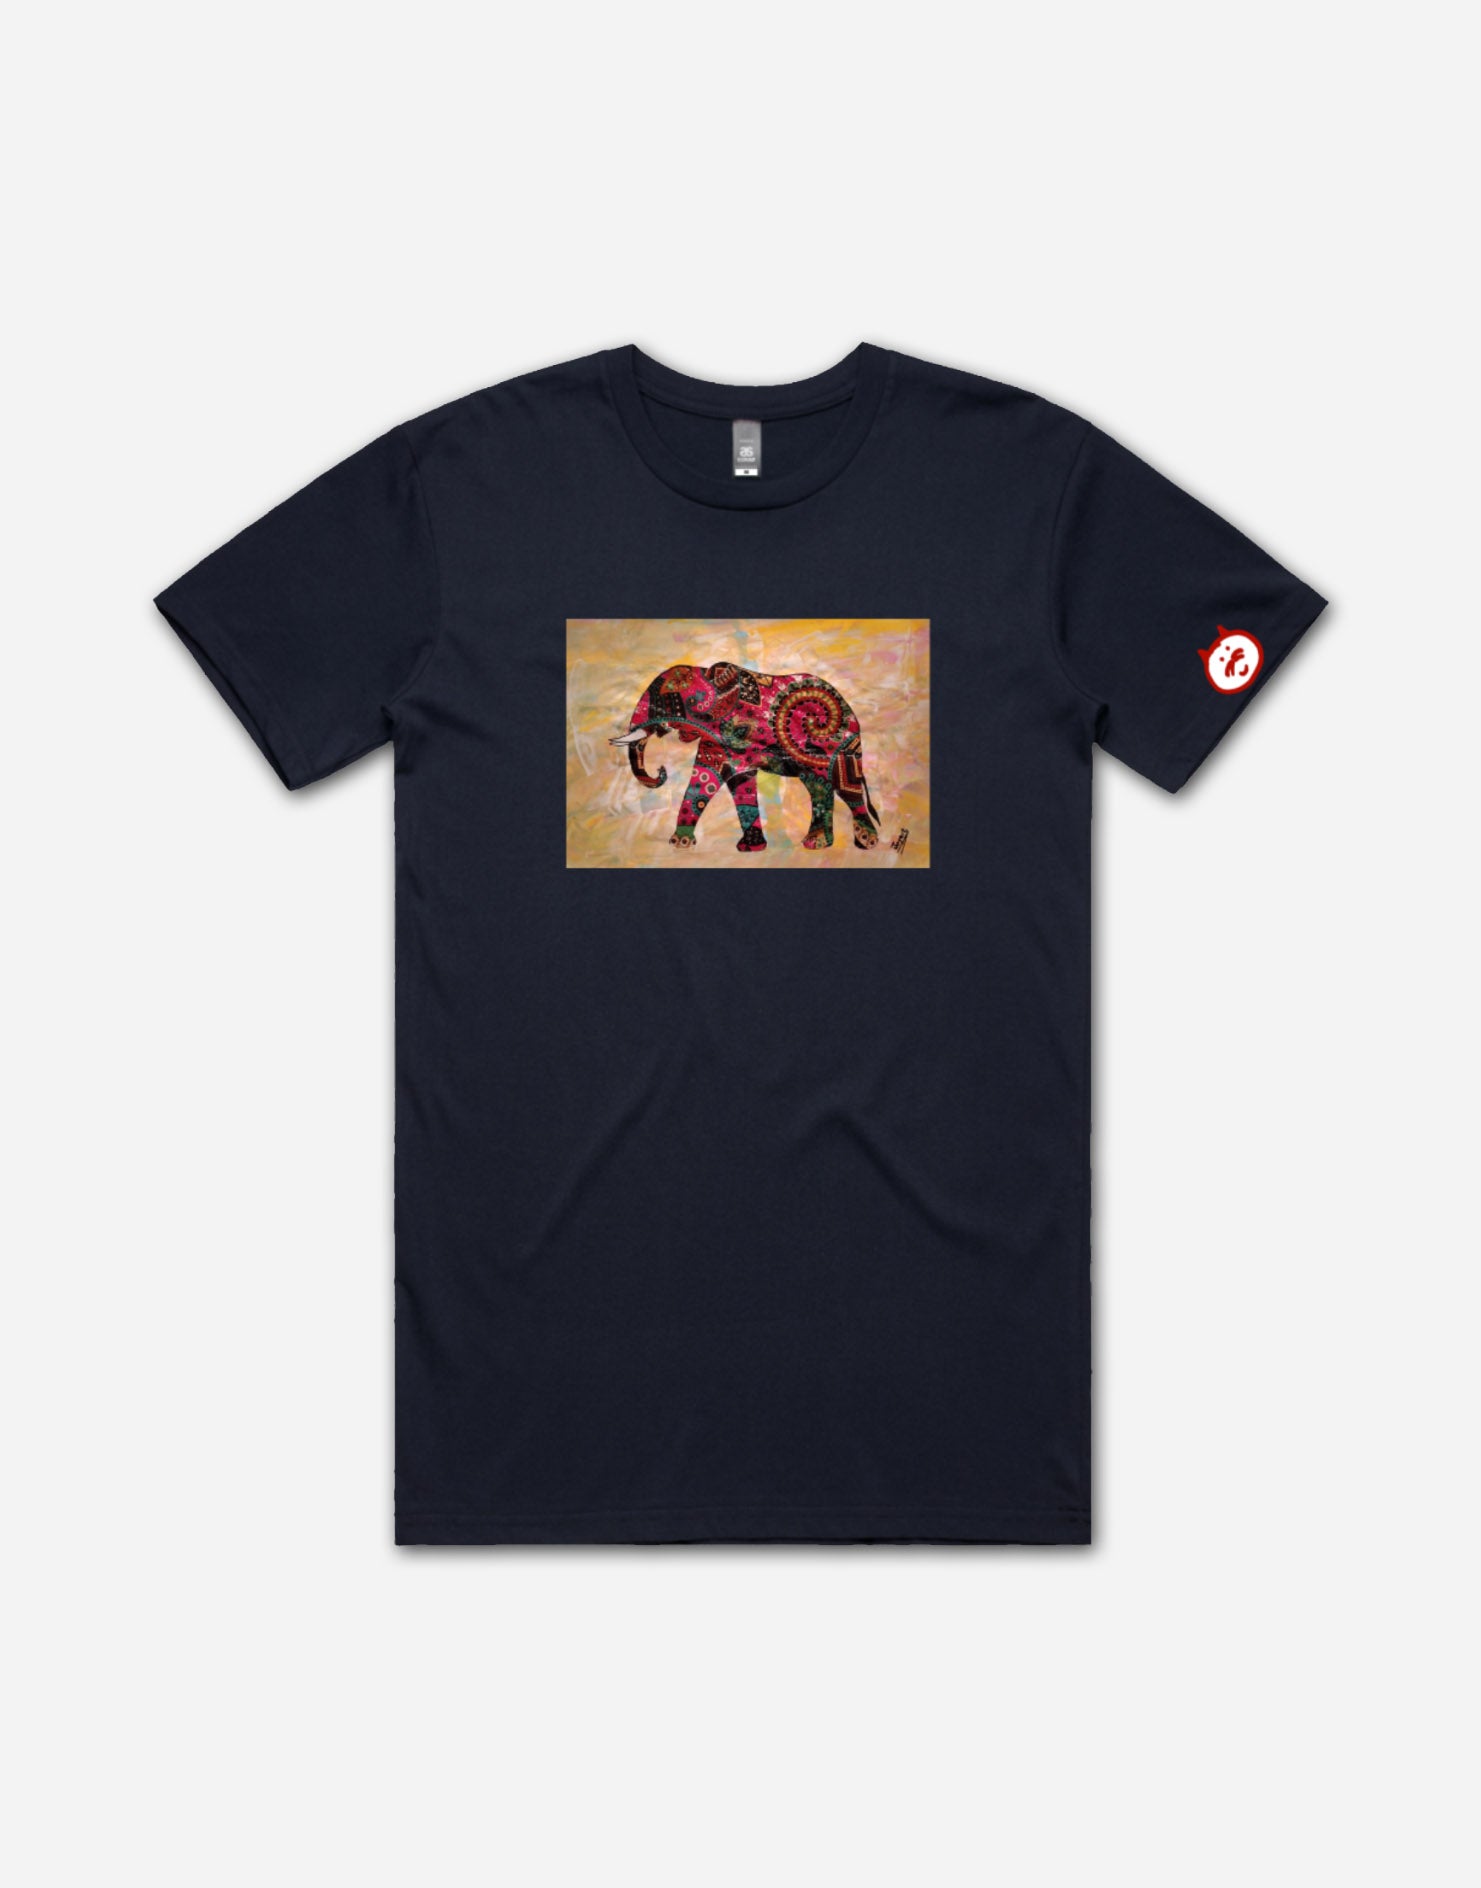 CES Canada x RedCat "Elephant" Fundraiser Tee Front